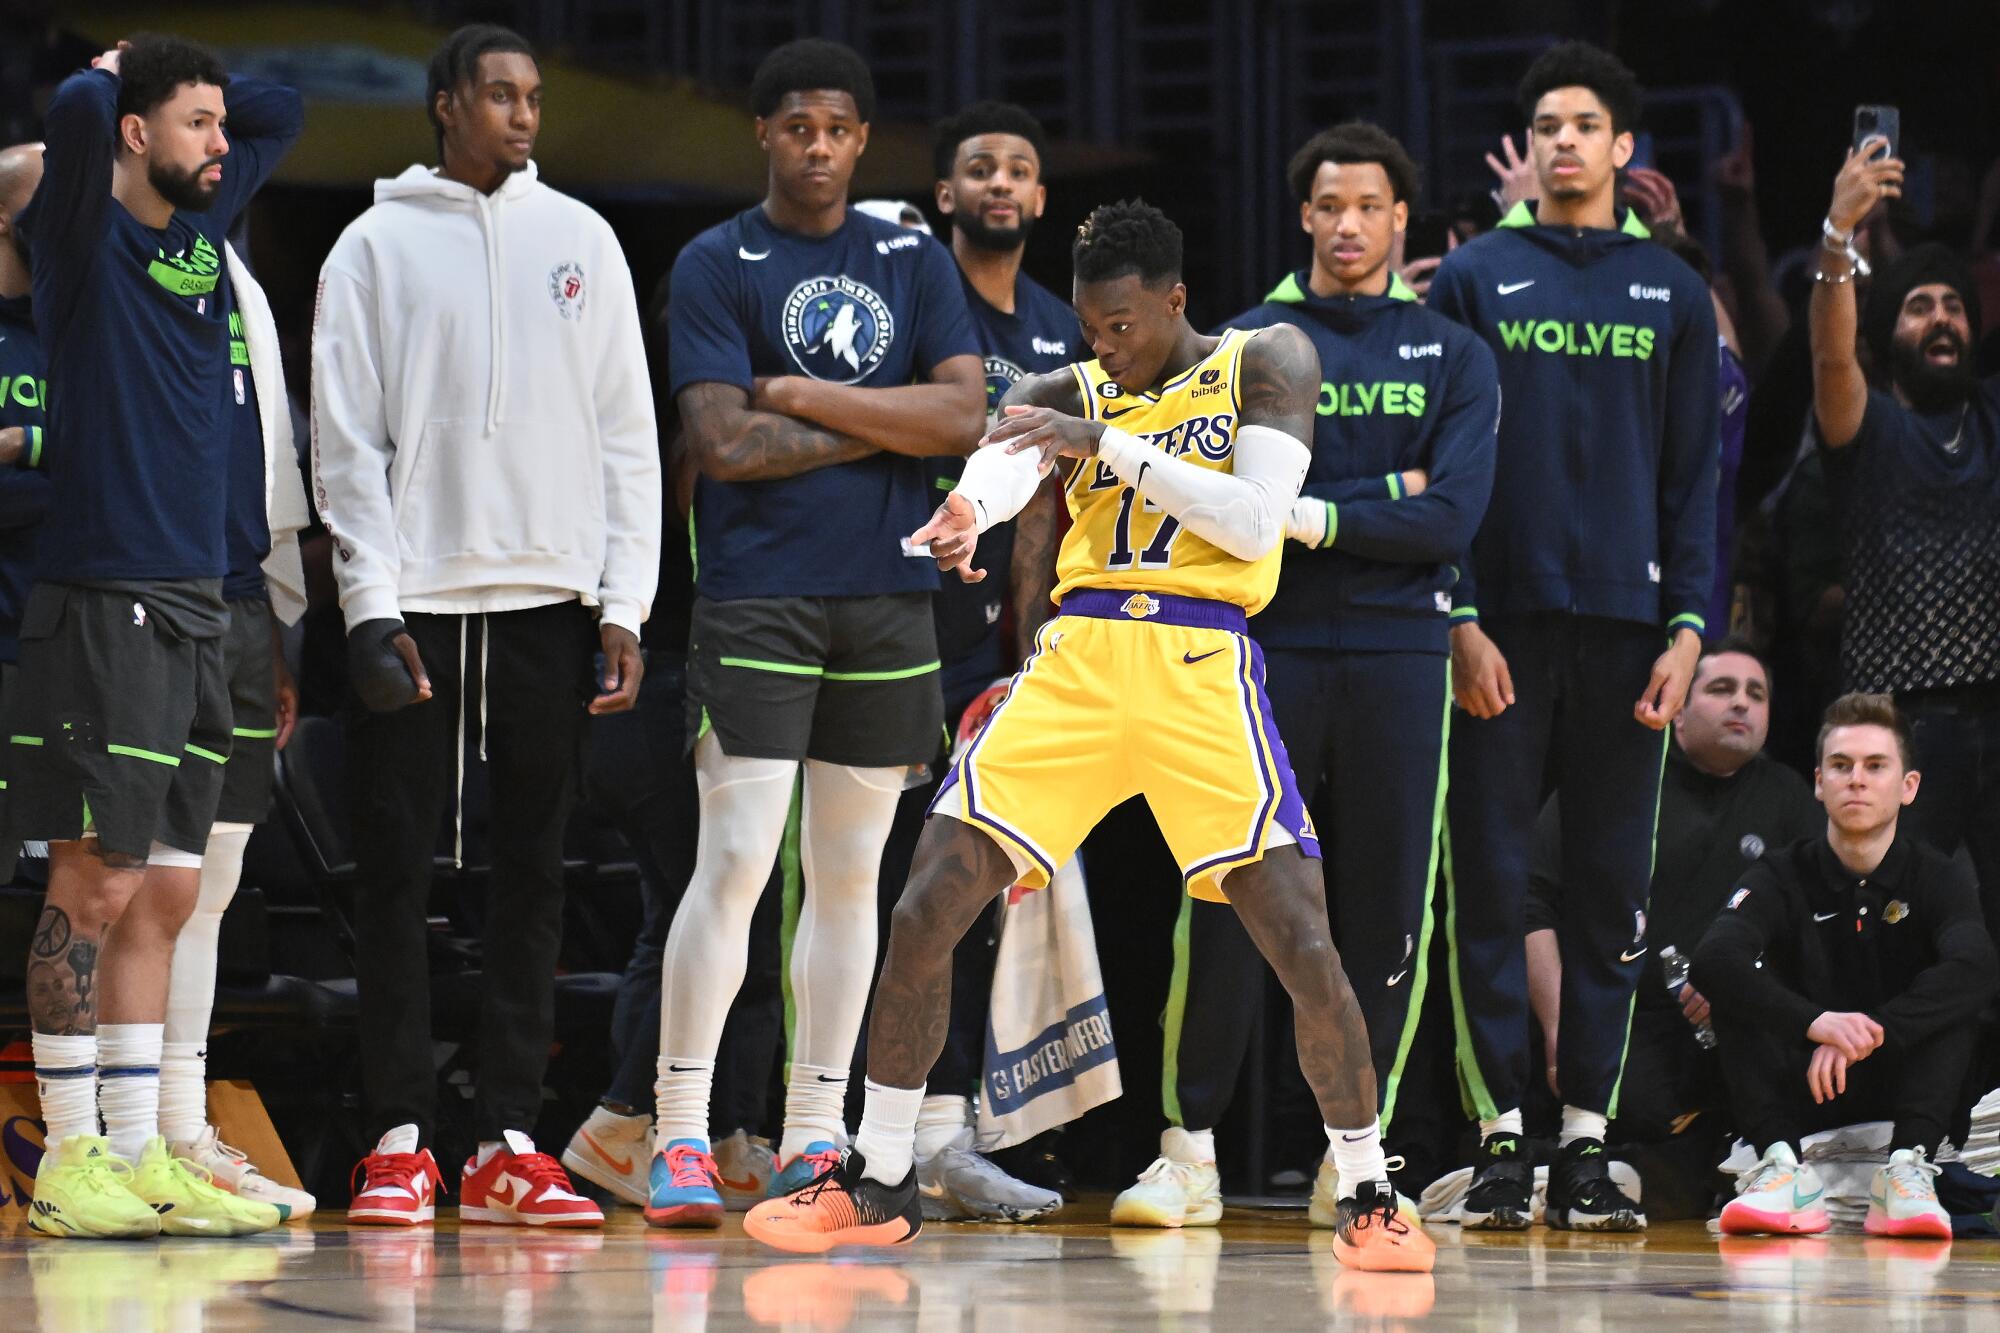 Lakers guard Dennis Schroder strikes the "freeze" pose in front of the Timberwolves bench after making a go-ahead 3-pointer.